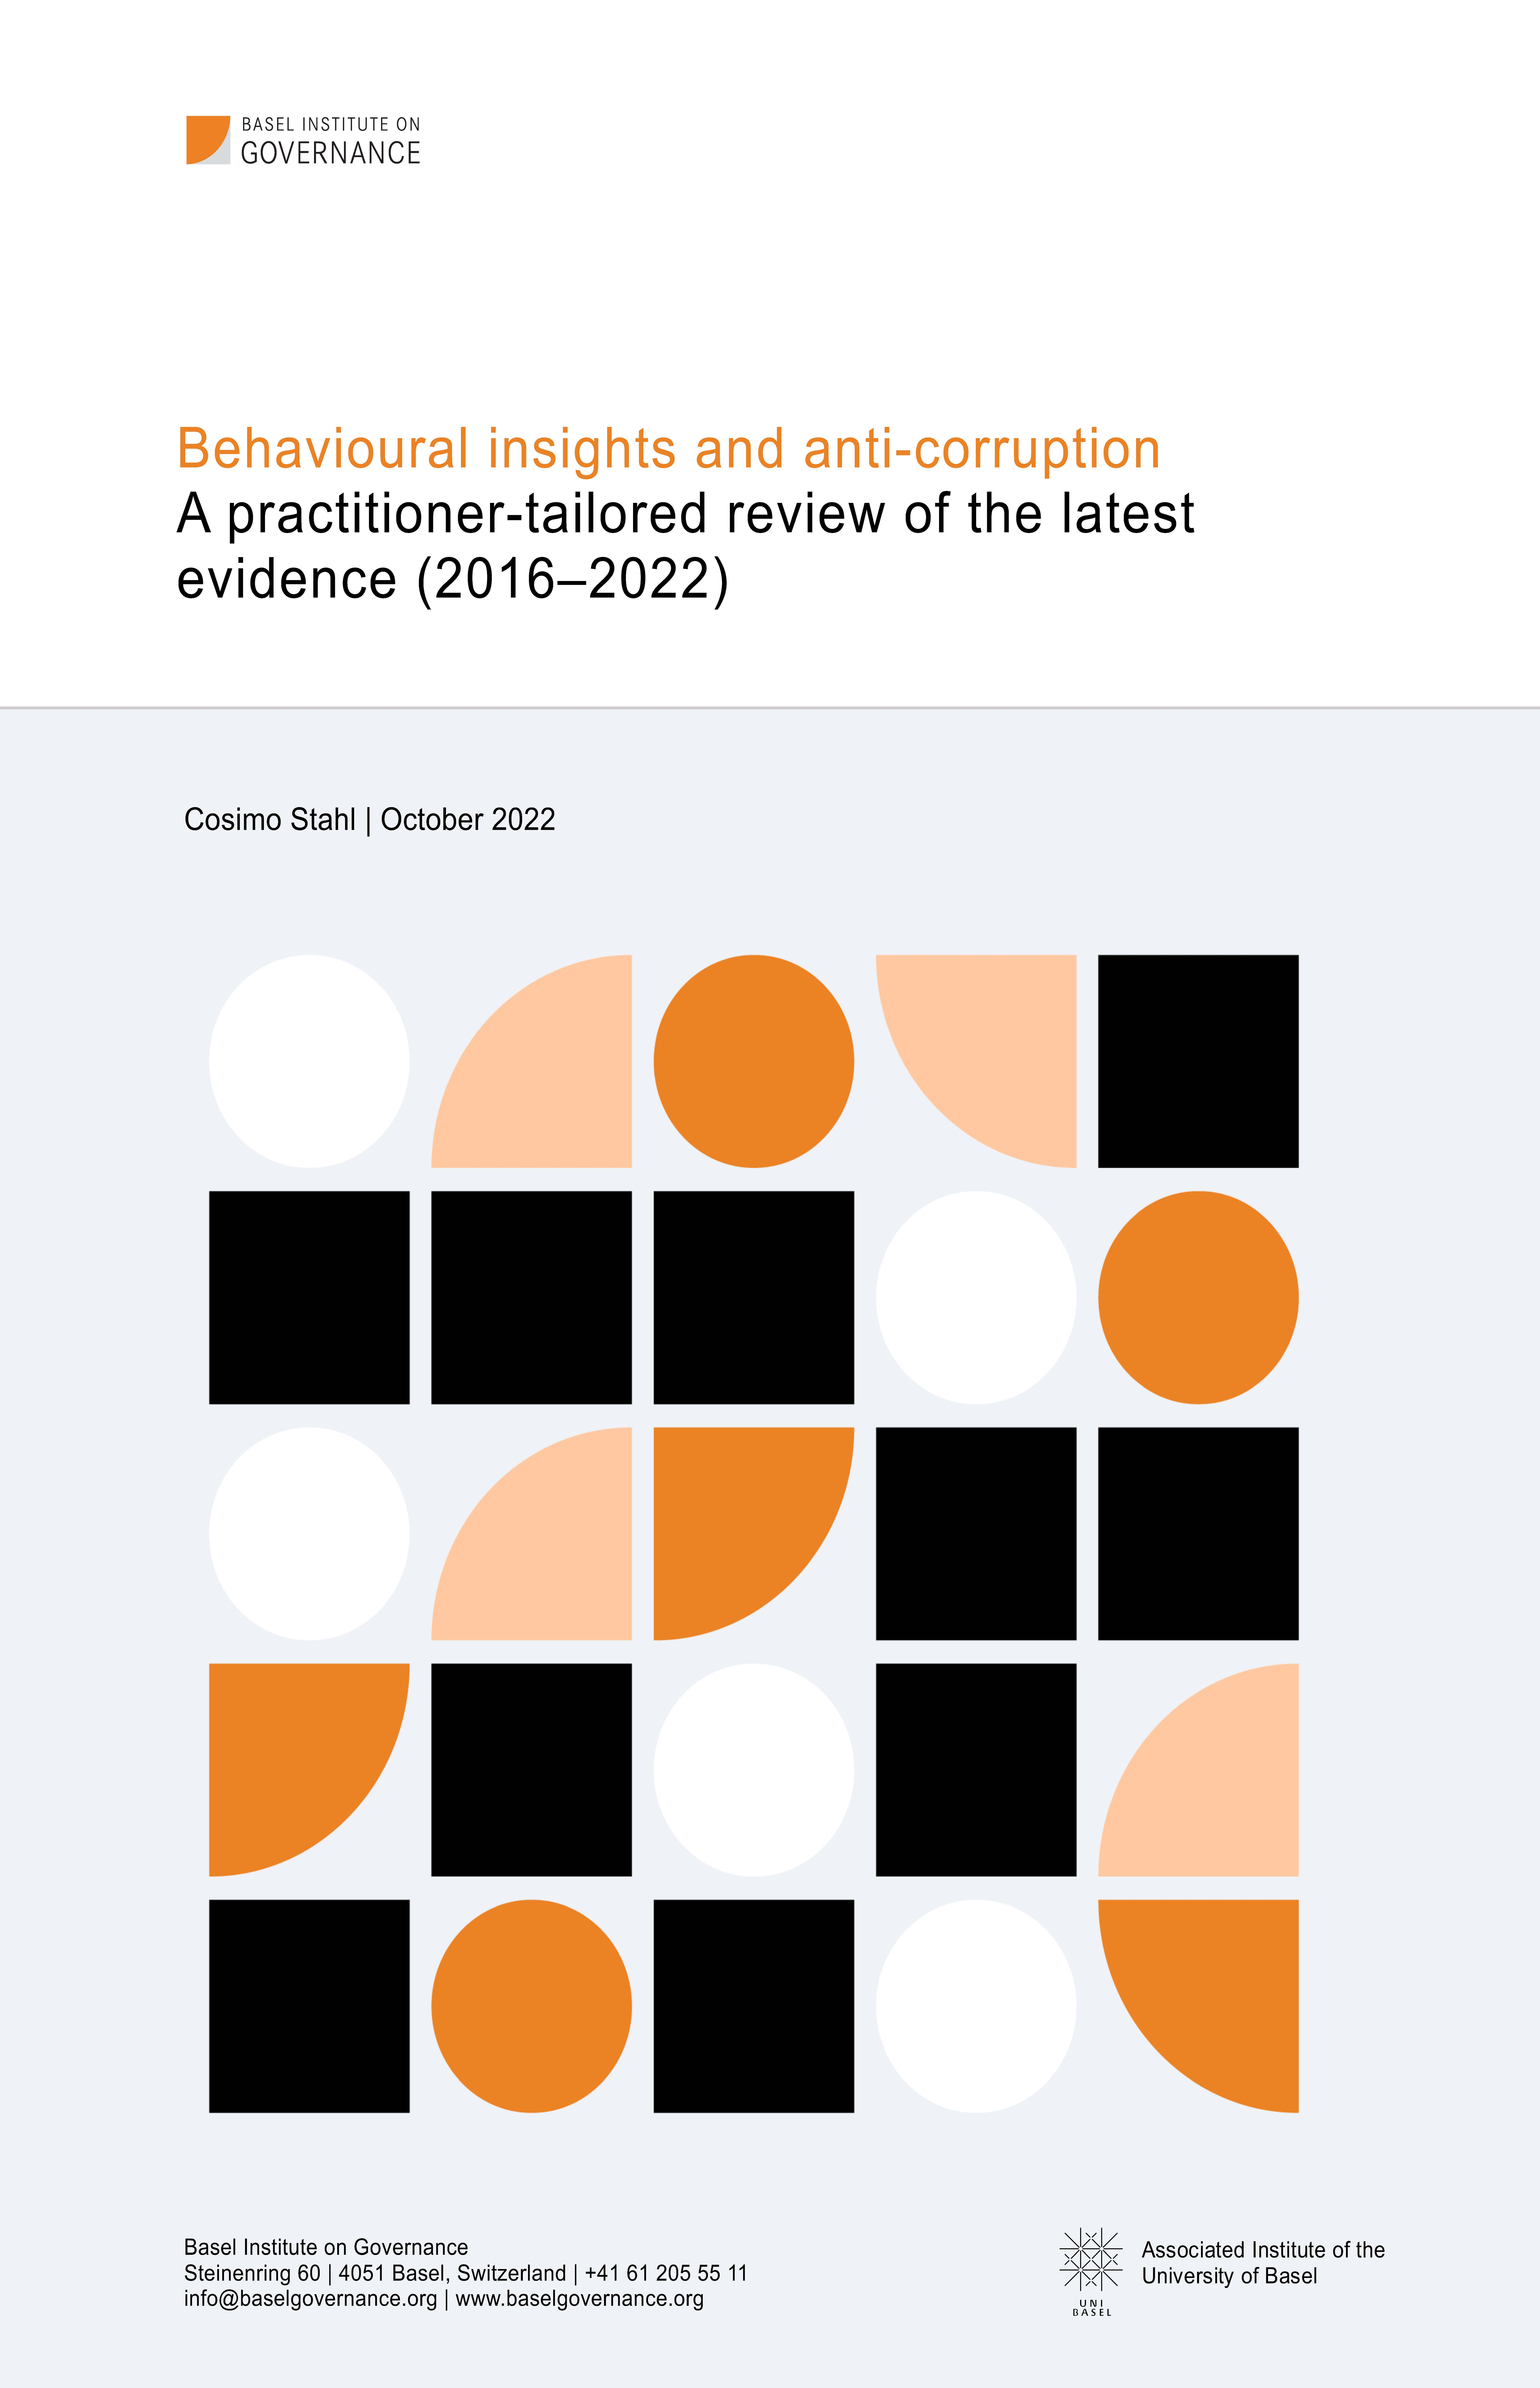 Cover page of behavioural interventions report